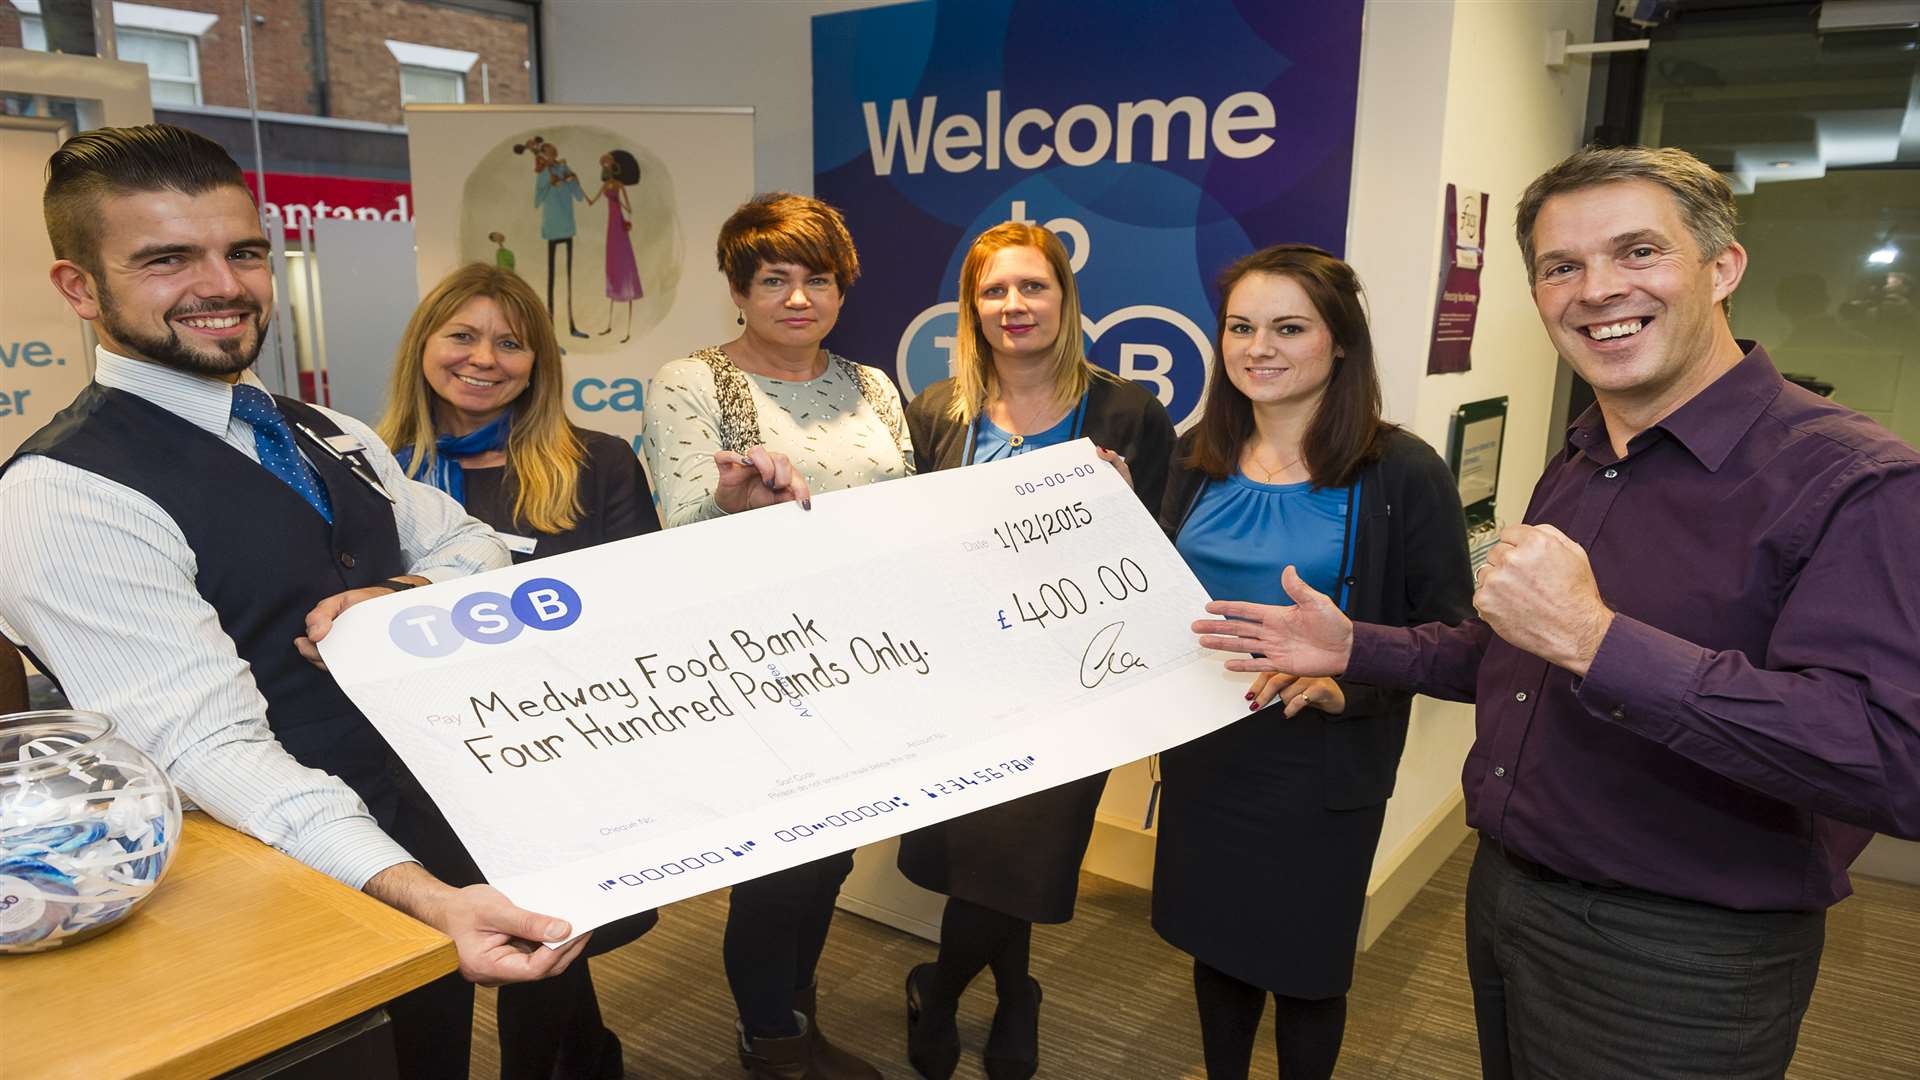 Staff at TSB in Chatham present Ian Childs (right) from Medway Foodbank with a cheque for £400.